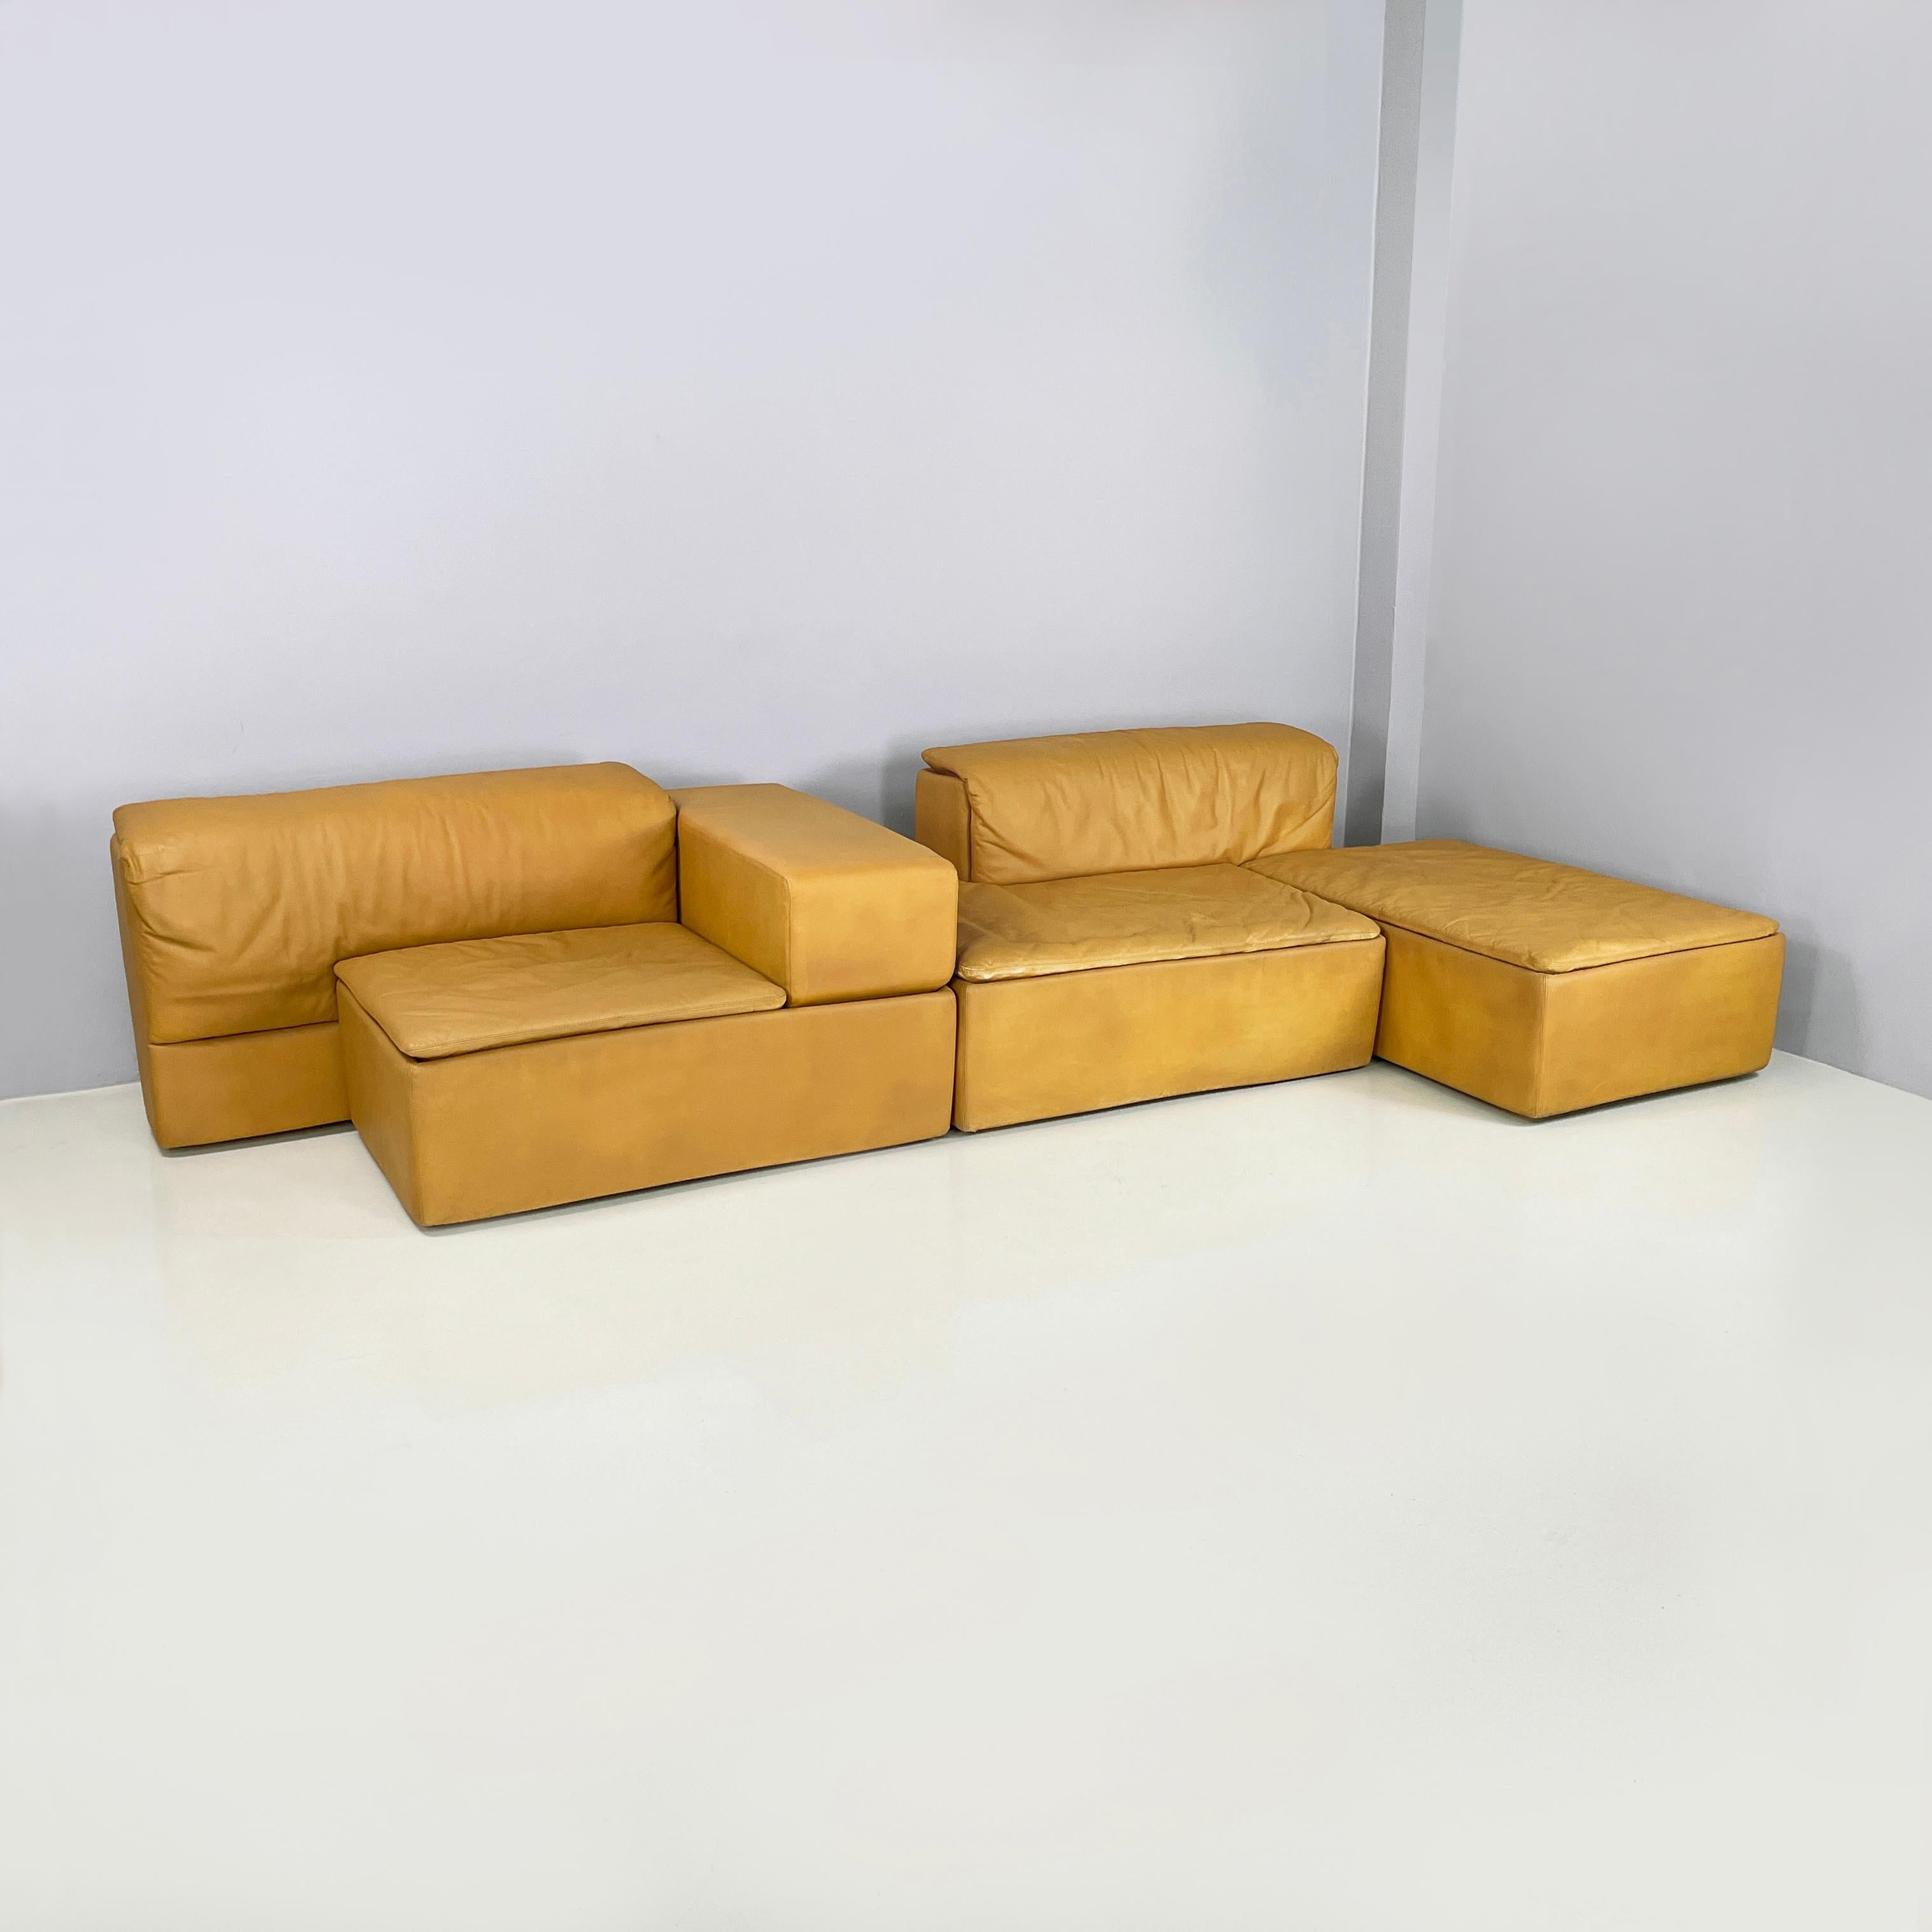 Italian modern Brown leather modular sofa Paione by Claudio Salocchi for Sormani, 1970s
Modular sofa mod. Paione entirely in camel brown leather. The 3 modules are: a rectangular pouf, a module with a backrest and one with a backrest and armrest.